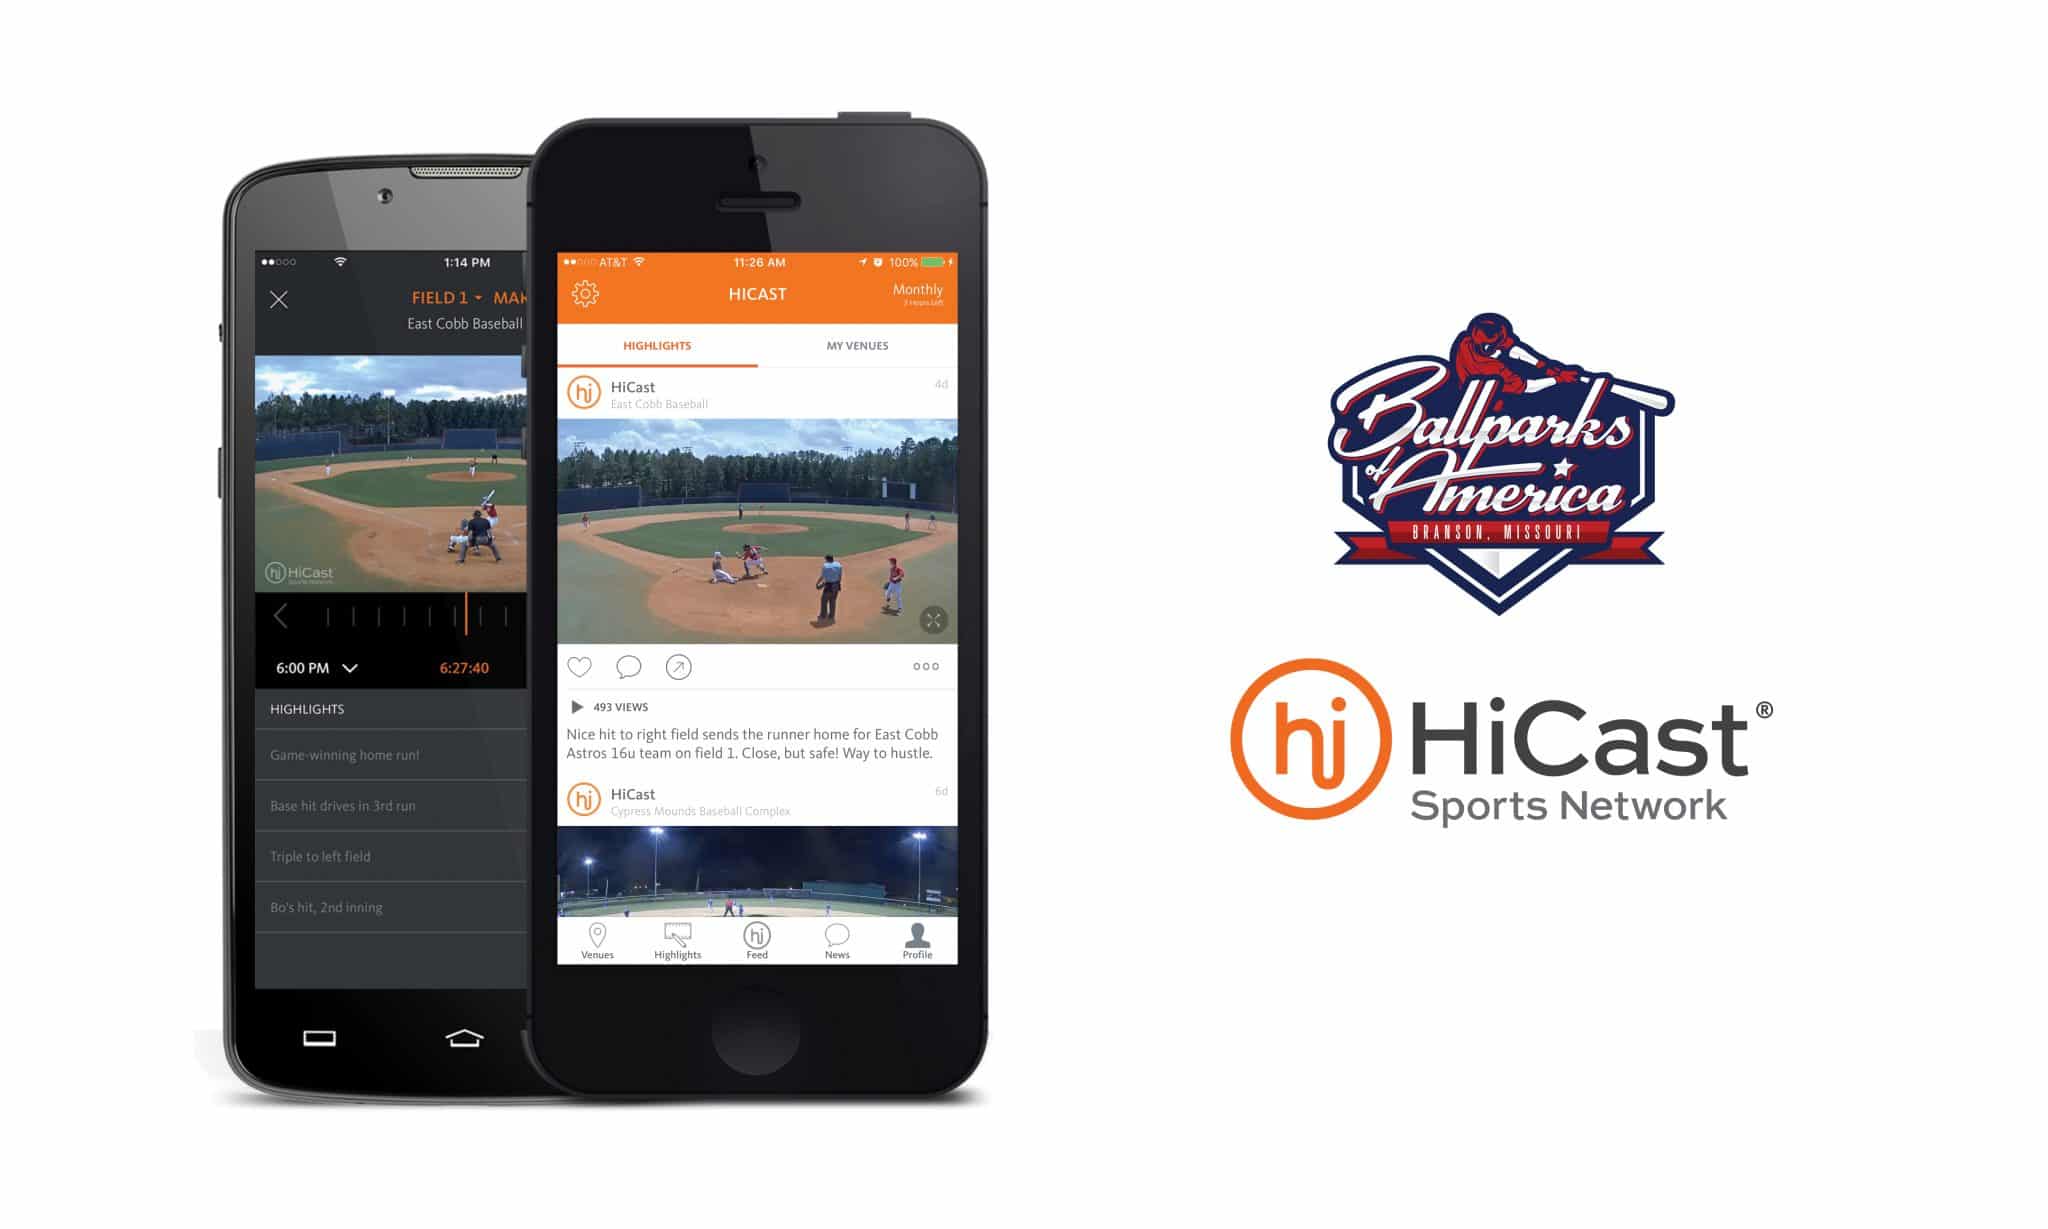 Ballparks of America announces Partnership with HiCast Sports Network